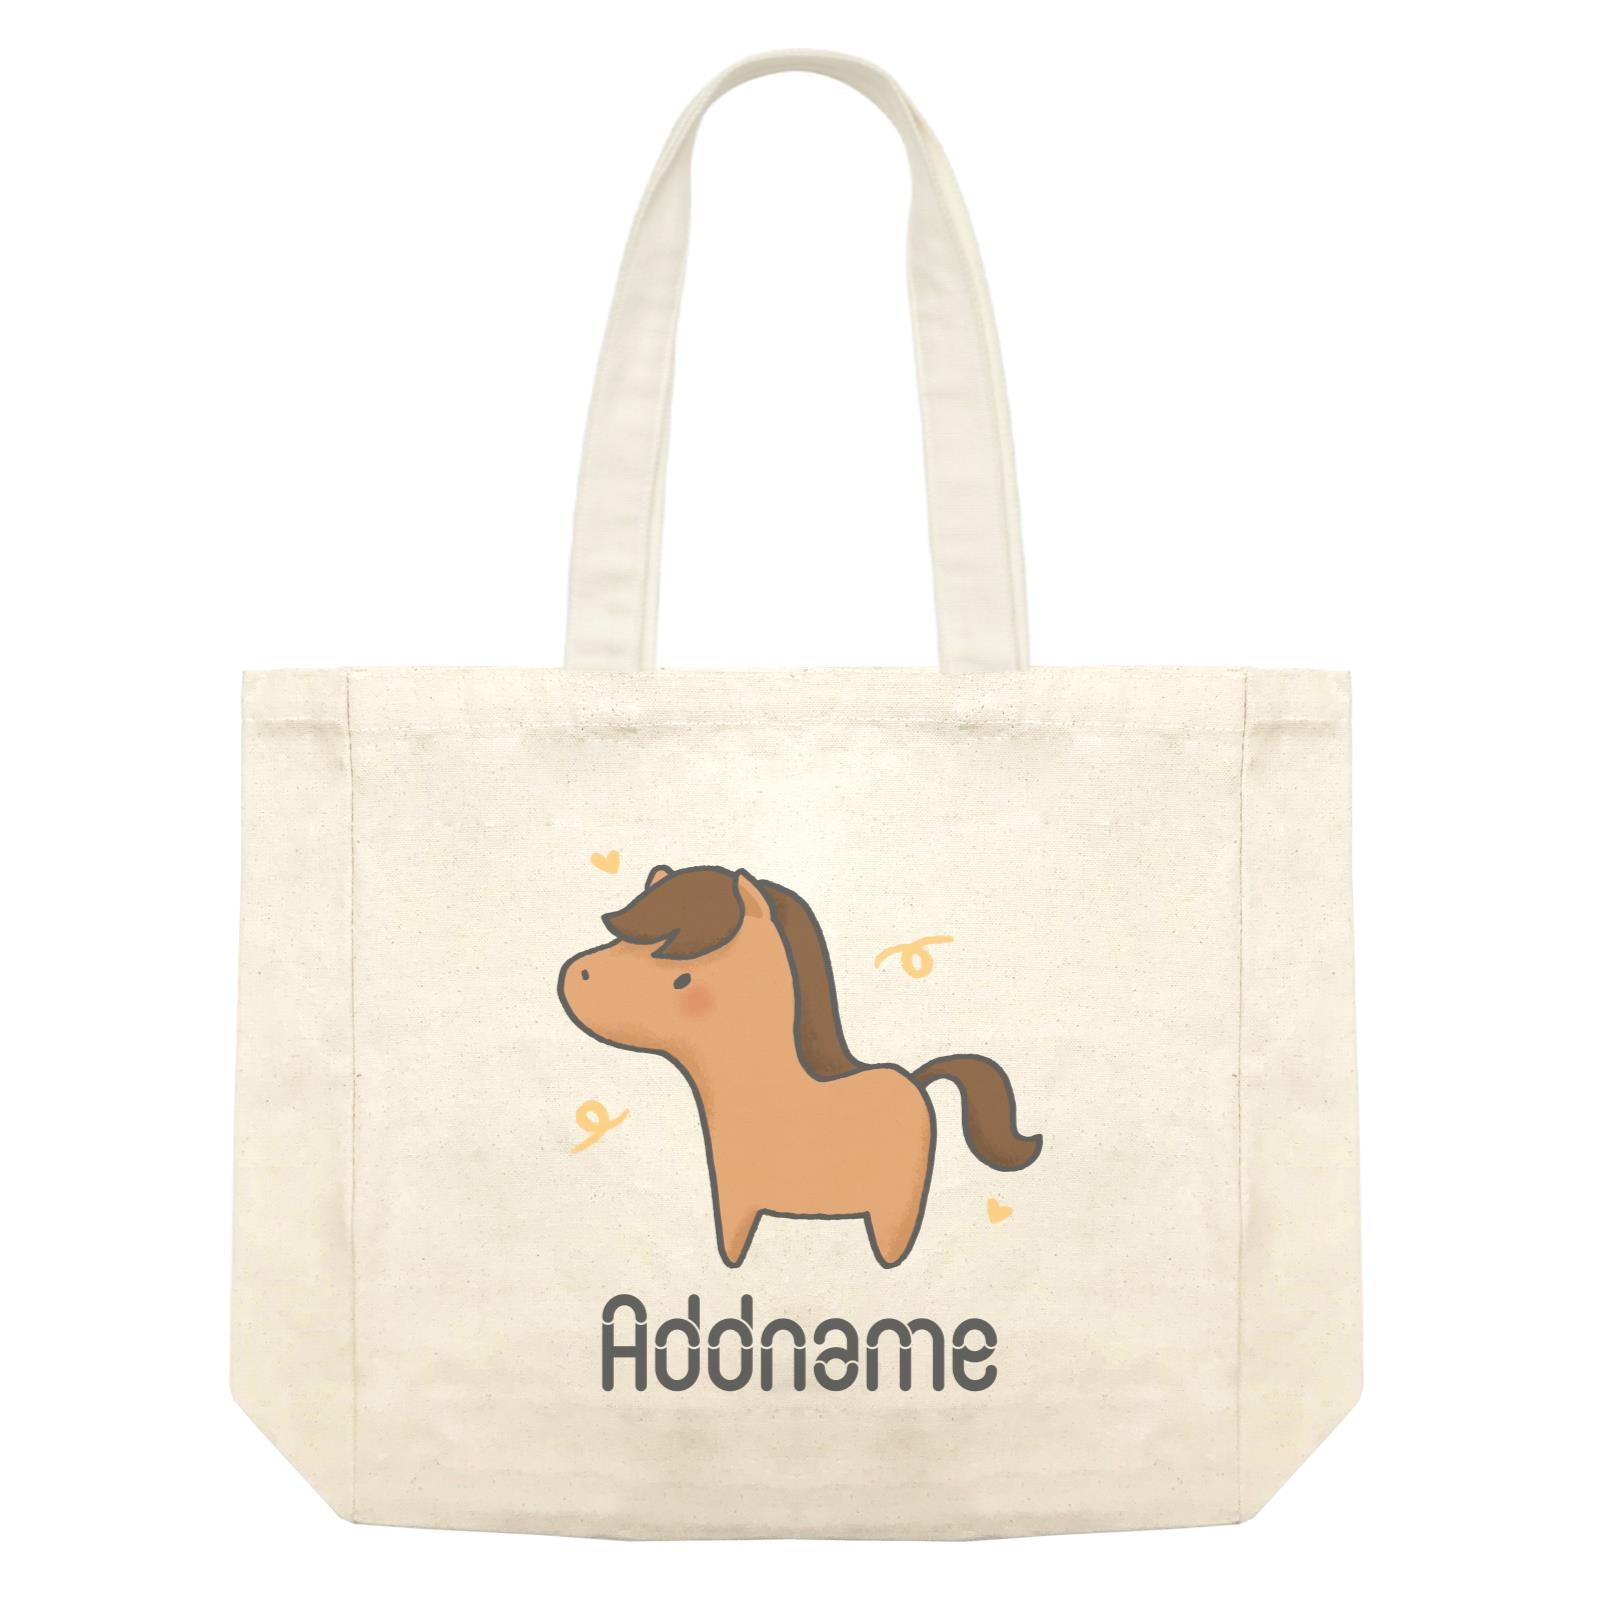 Cute Hand Drawn Style Horse Addname Shopping Bag